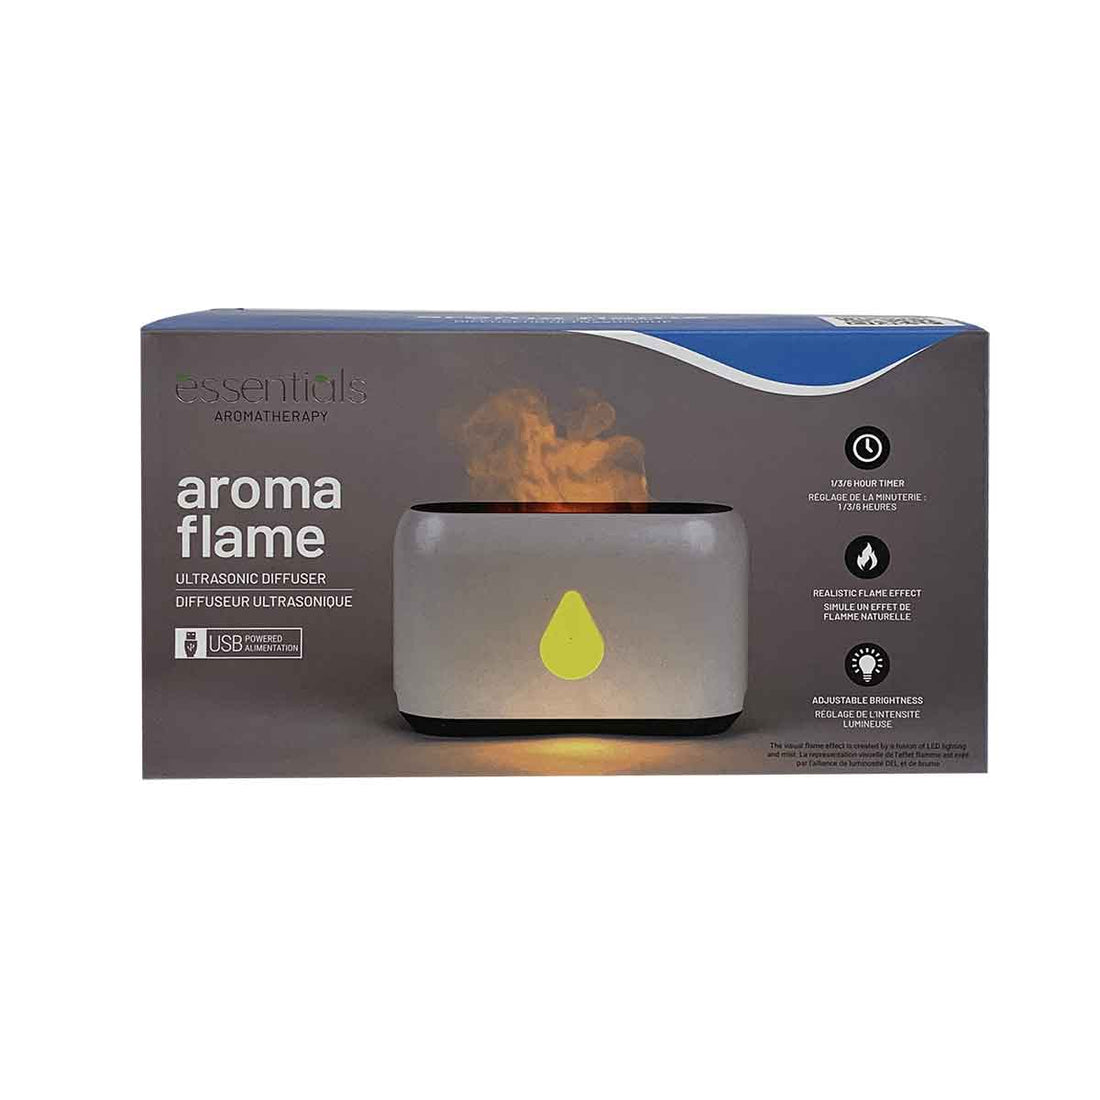 Aroma Flame Ultrasonic Diffuser - Premium Diffuser from Relaxus -  !